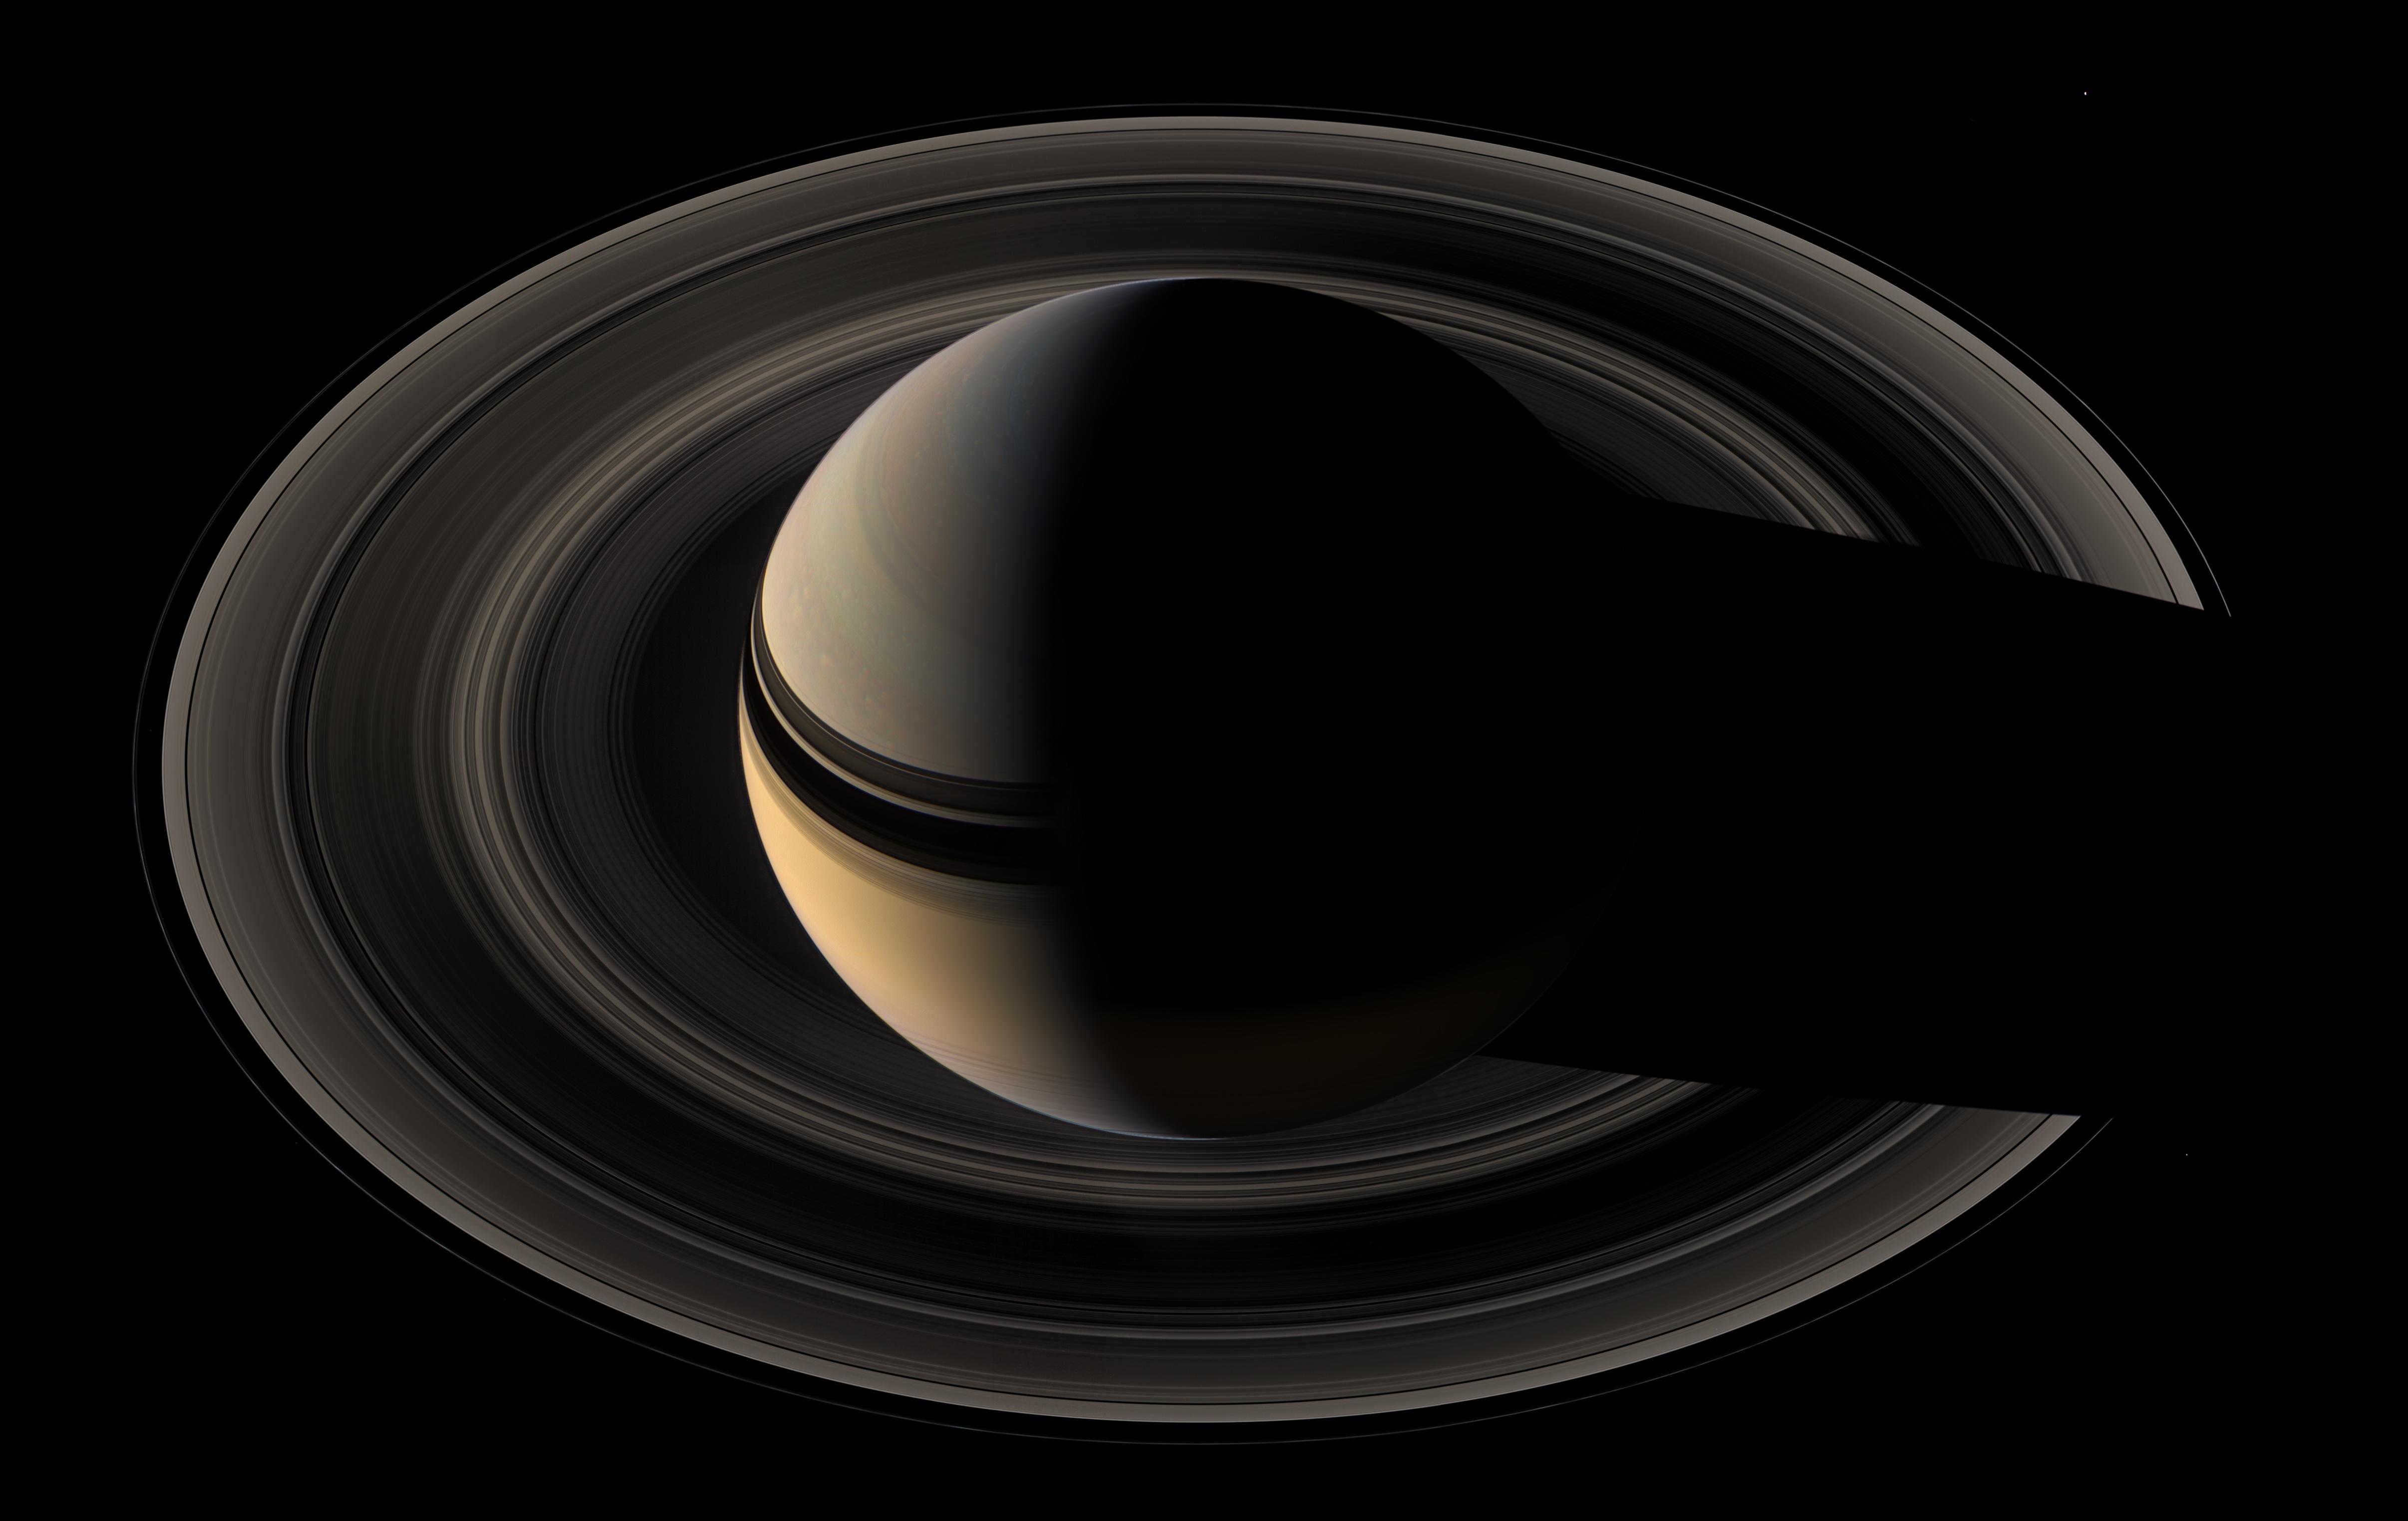 Saturn sits nested in its rings of ice as Cassini once again plunges toward the graceful giant.